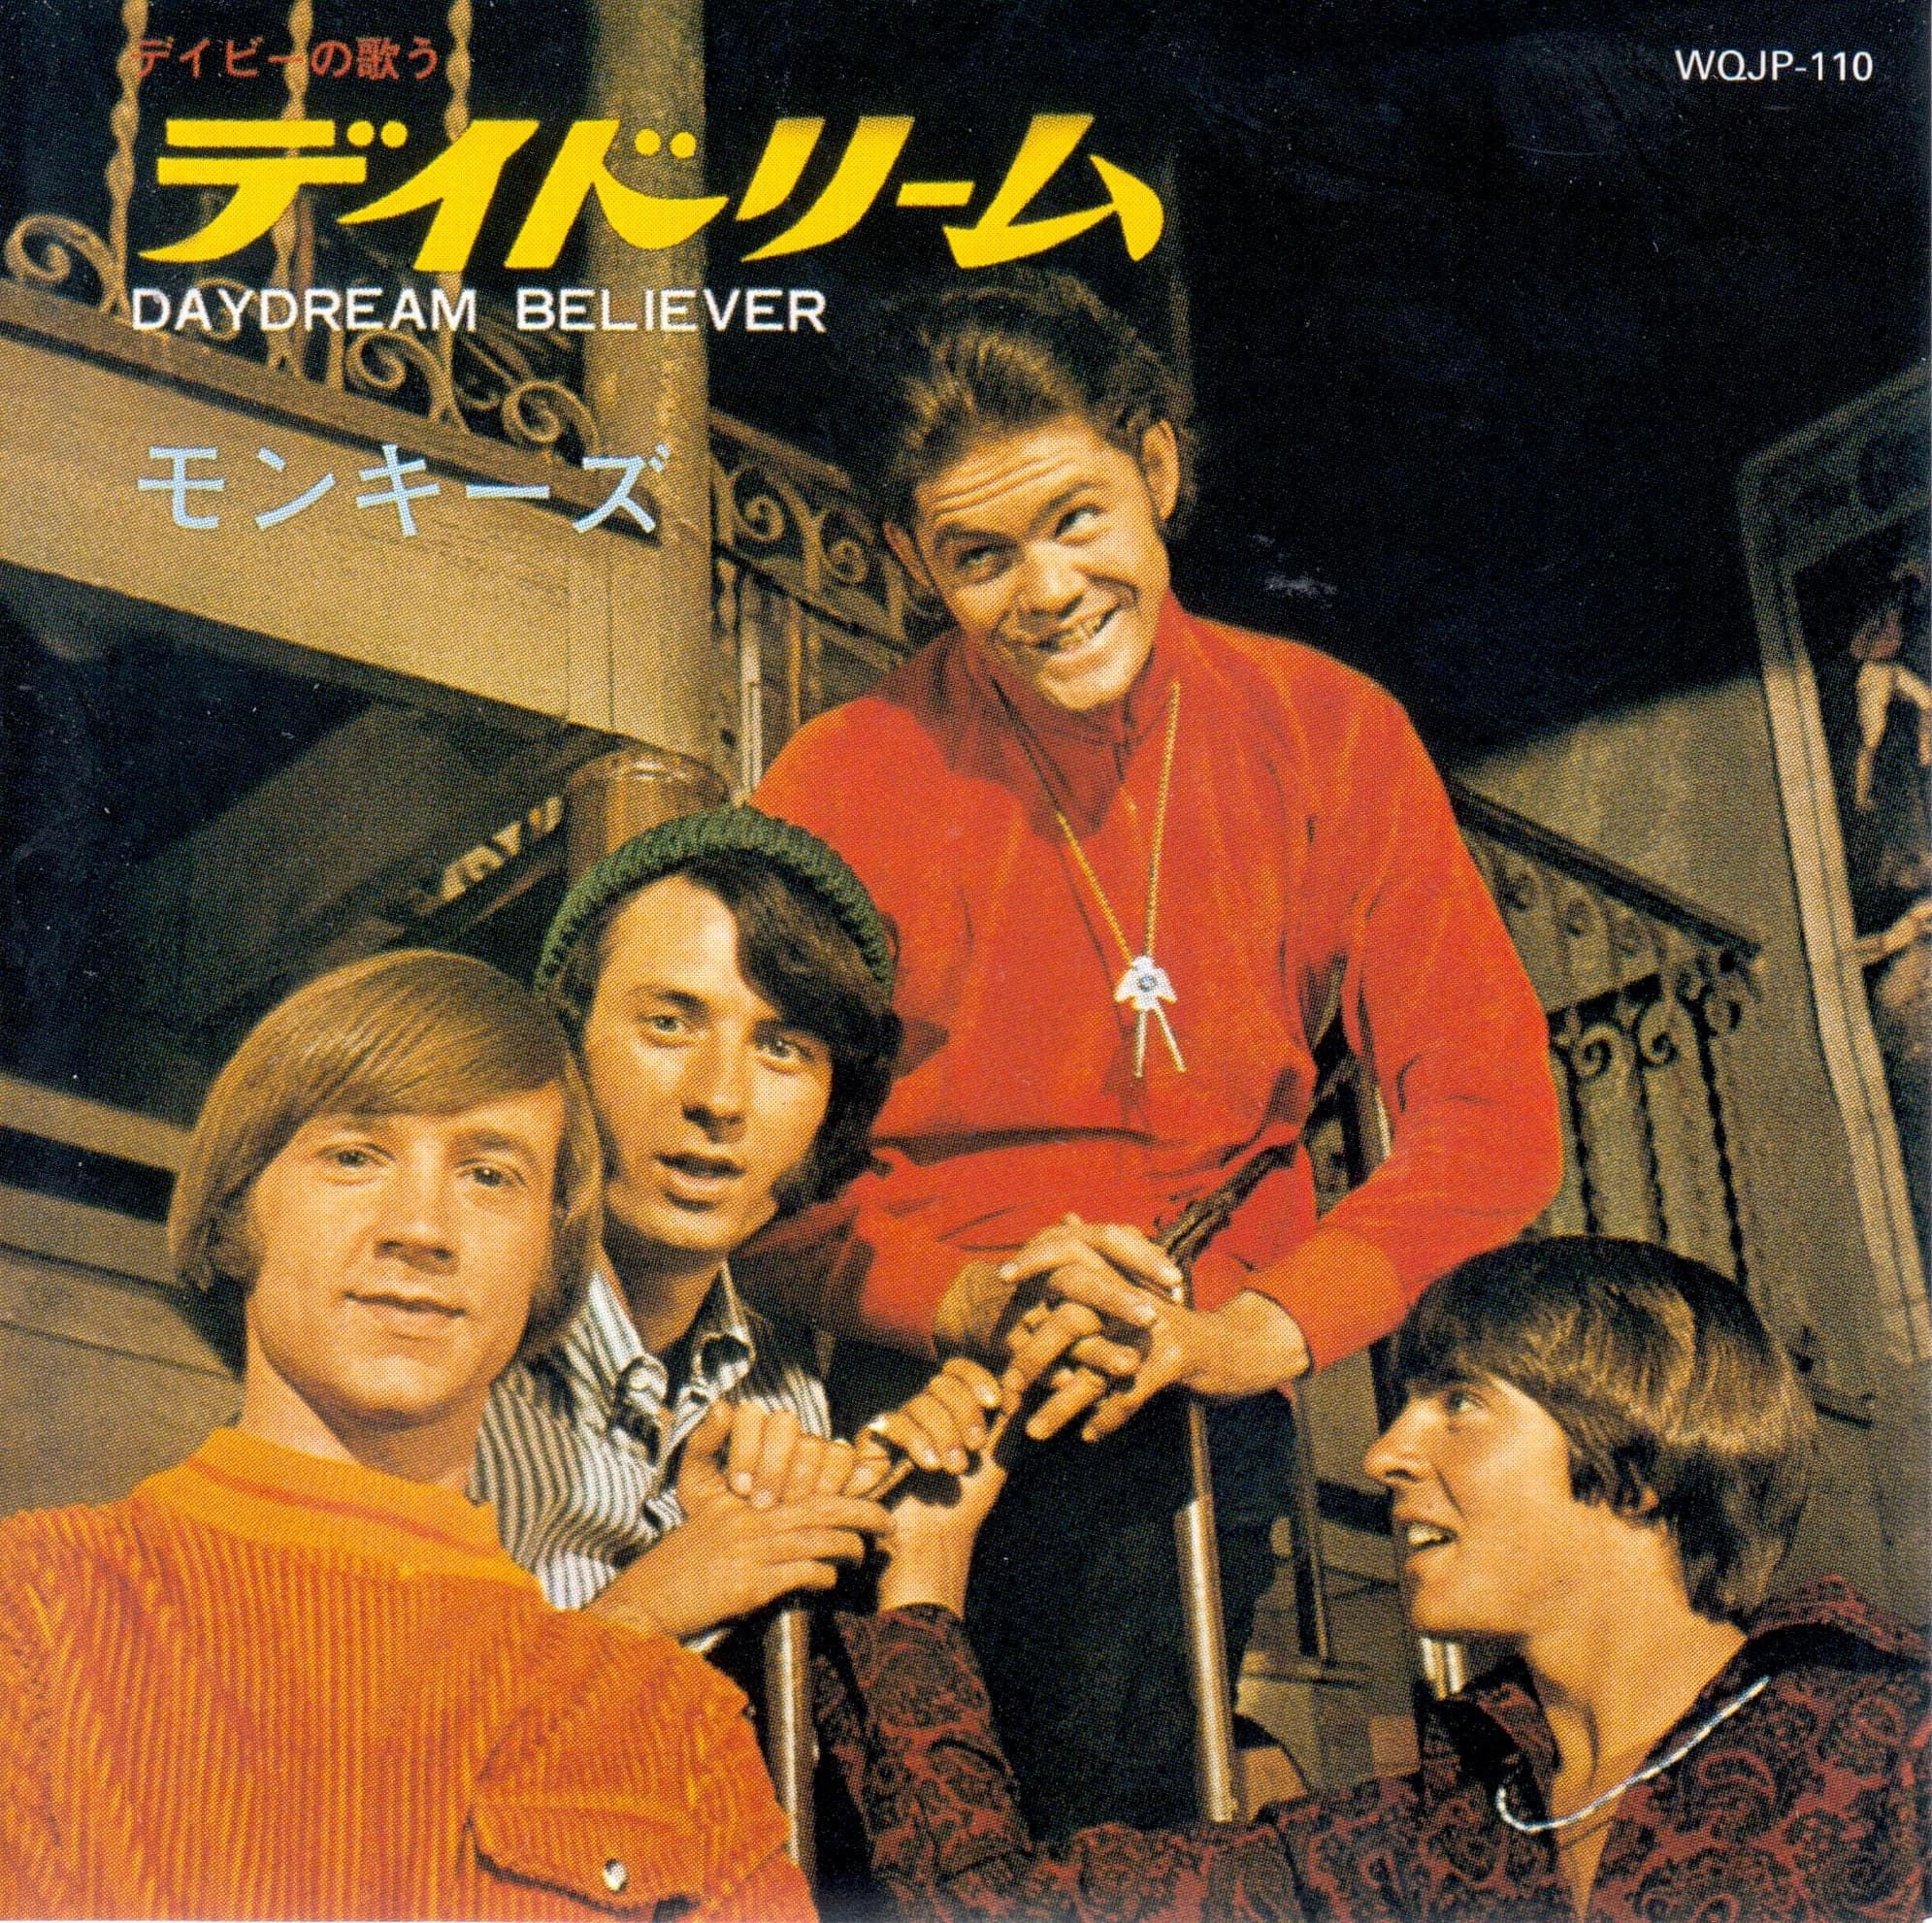 Daydream Believer                    by                    The Monkees